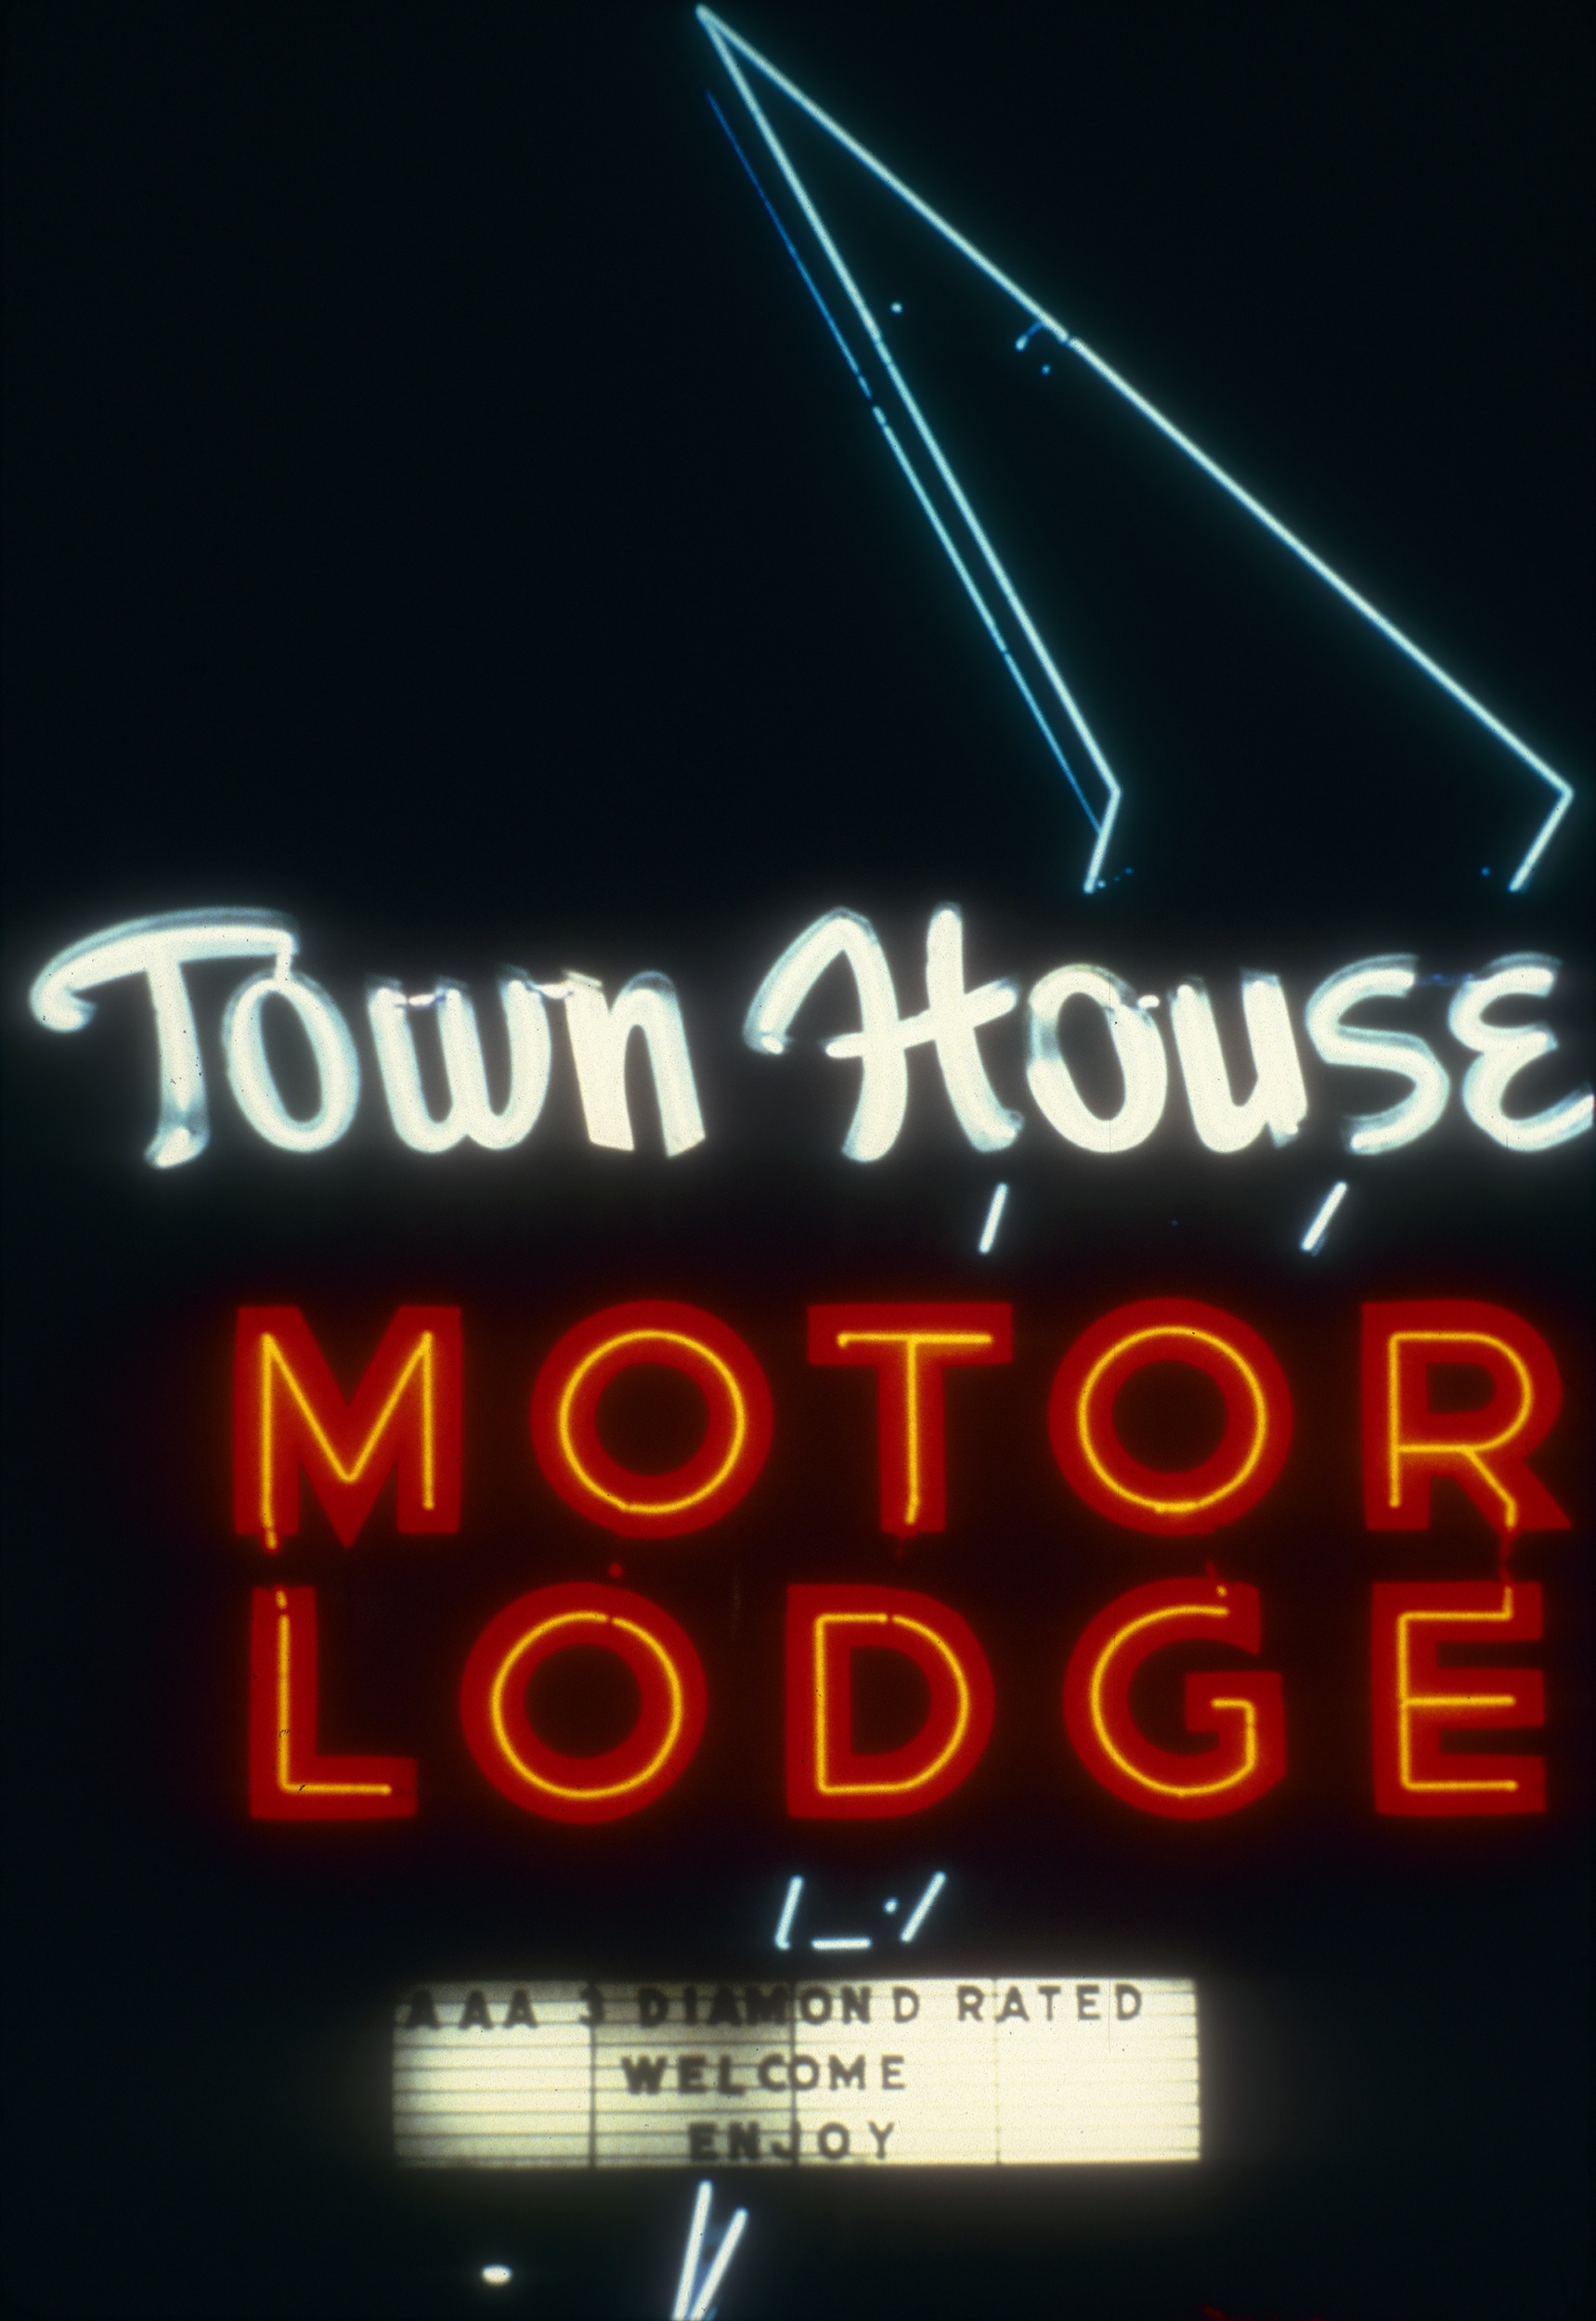 Slide of the neon sign for the Town House Motor Lodge at night, Reno, Nevada, 1986